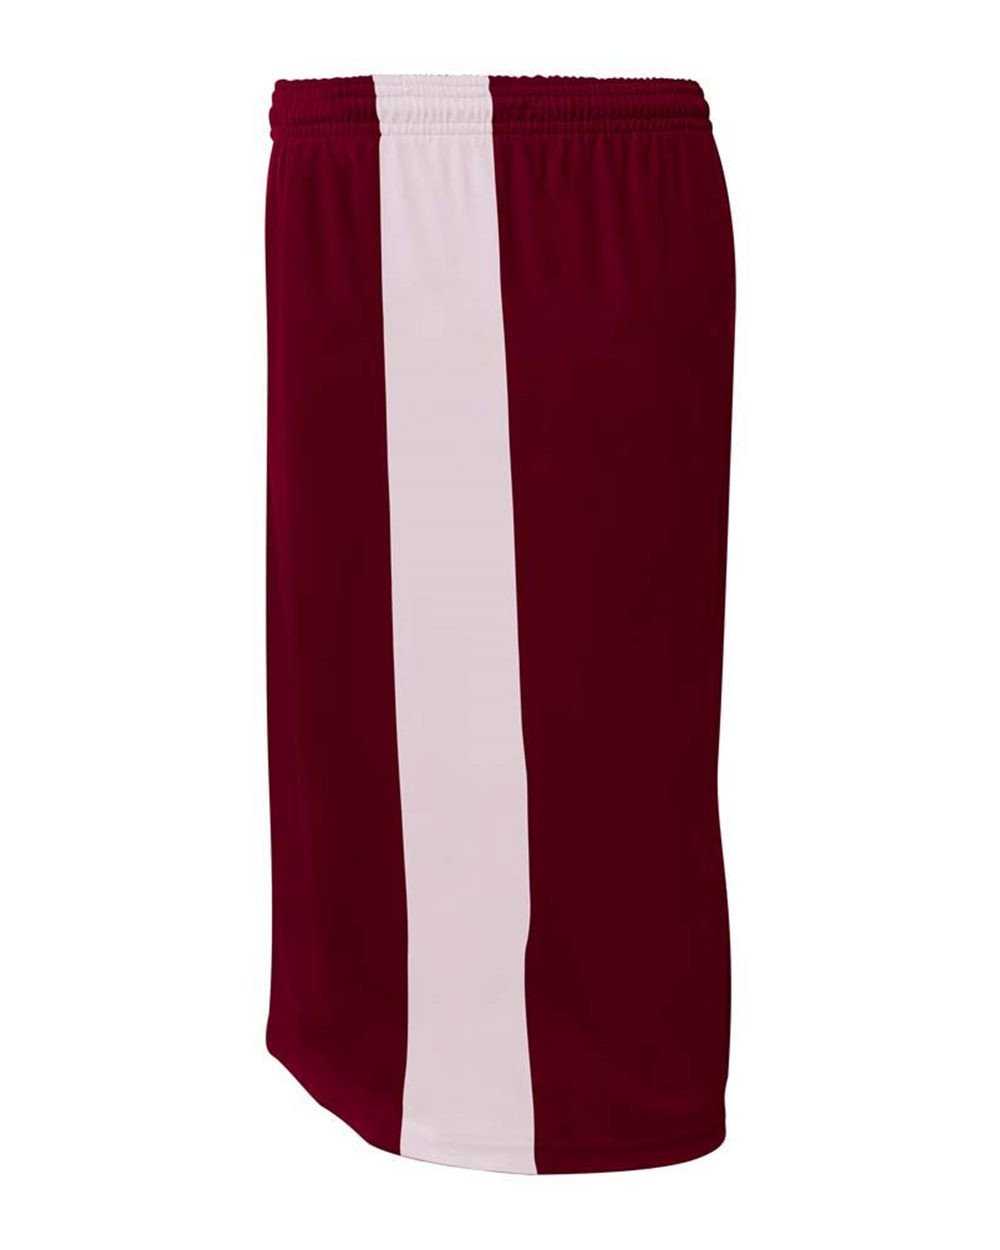 A4 NB5284 Youth Reversible Moisture Management 8&quot; Short - Maroon White - HIT a Double